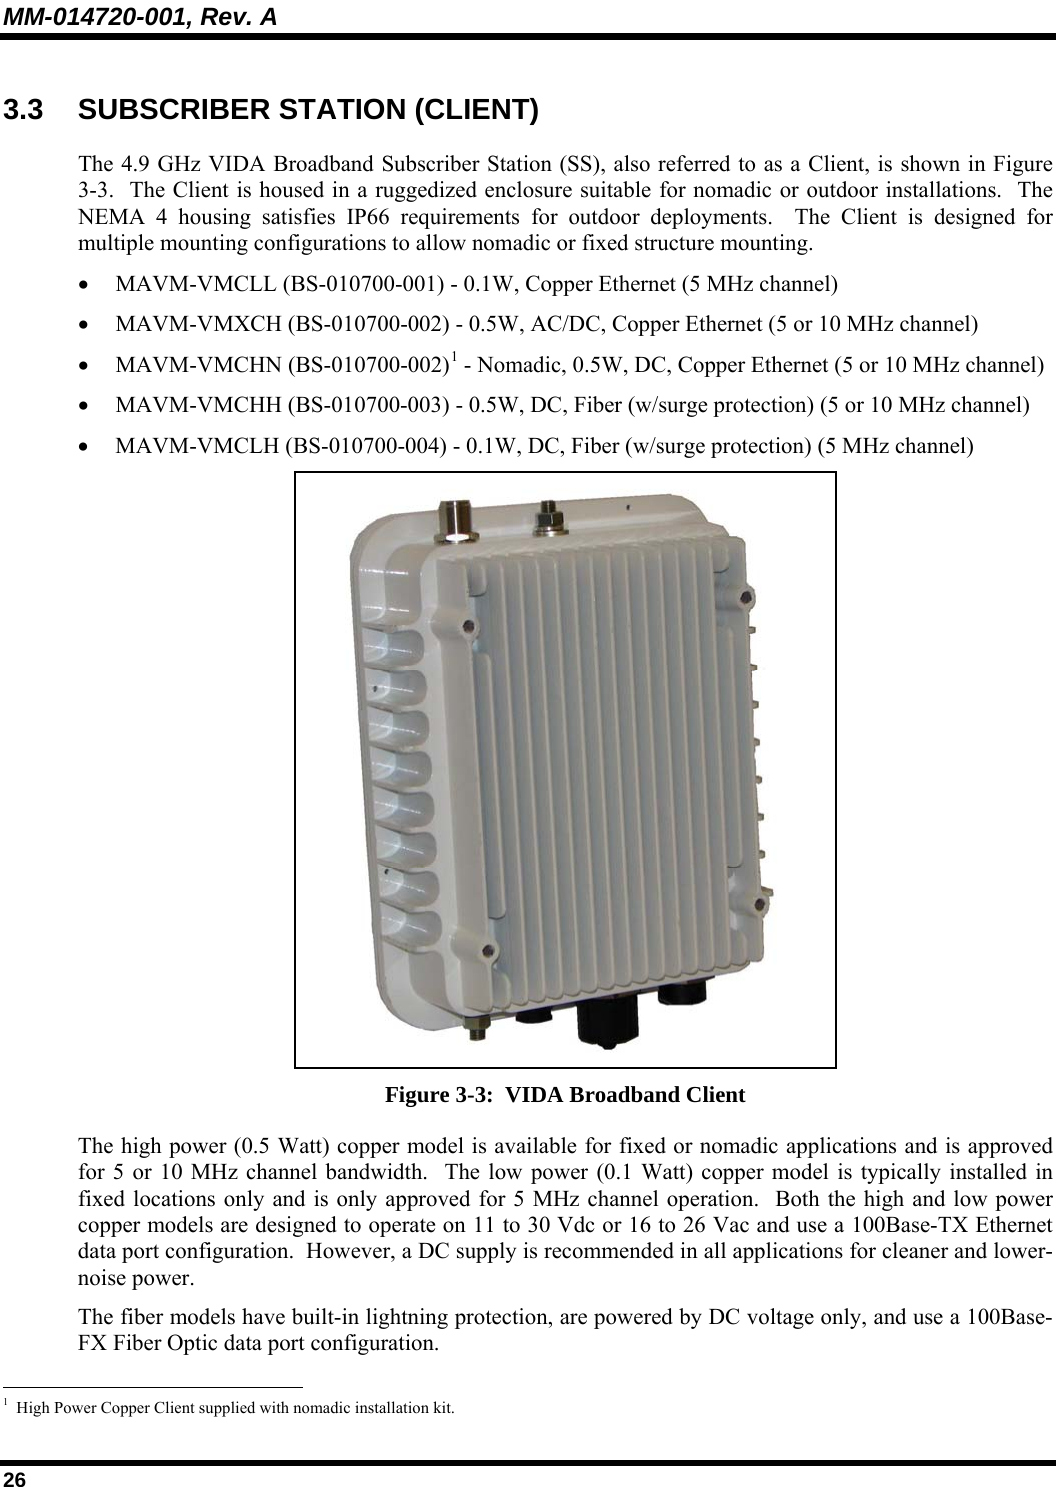 MM-014720-001, Rev. A 26 3.3 SUBSCRIBER STATION (CLIENT) The 4.9 GHz VIDA Broadband Subscriber Station (SS), also referred to as a Client, is shown in Figure 3-3.  The Client is housed in a ruggedized enclosure suitable for nomadic or outdoor installations.  The NEMA 4 housing satisfies IP66 requirements for outdoor deployments.  The Client is designed for multiple mounting configurations to allow nomadic or fixed structure mounting. • MAVM-VMCLL (BS-010700-001) - 0.1W, Copper Ethernet (5 MHz channel) • MAVM-VMXCH (BS-010700-002) - 0.5W, AC/DC, Copper Ethernet (5 or 10 MHz channel) • MAVM-VMCHN (BS-010700-002)1 - Nomadic, 0.5W, DC, Copper Ethernet (5 or 10 MHz channel) • MAVM-VMCHH (BS-010700-003) - 0.5W, DC, Fiber (w/surge protection) (5 or 10 MHz channel) • MAVM-VMCLH (BS-010700-004) - 0.1W, DC, Fiber (w/surge protection) (5 MHz channel)  Figure 3-3:  VIDA Broadband Client The high power (0.5 Watt) copper model is available for fixed or nomadic applications and is approved for 5 or 10 MHz channel bandwidth.  The low power (0.1 Watt) copper model is typically installed in fixed locations only and is only approved for 5 MHz channel operation.  Both the high and low power copper models are designed to operate on 11 to 30 Vdc or 16 to 26 Vac and use a 100Base-TX Ethernet data port configuration.  However, a DC supply is recommended in all applications for cleaner and lower-noise power. The fiber models have built-in lightning protection, are powered by DC voltage only, and use a 100Base-FX Fiber Optic data port configuration.                                                       1  High Power Copper Client supplied with nomadic installation kit. 